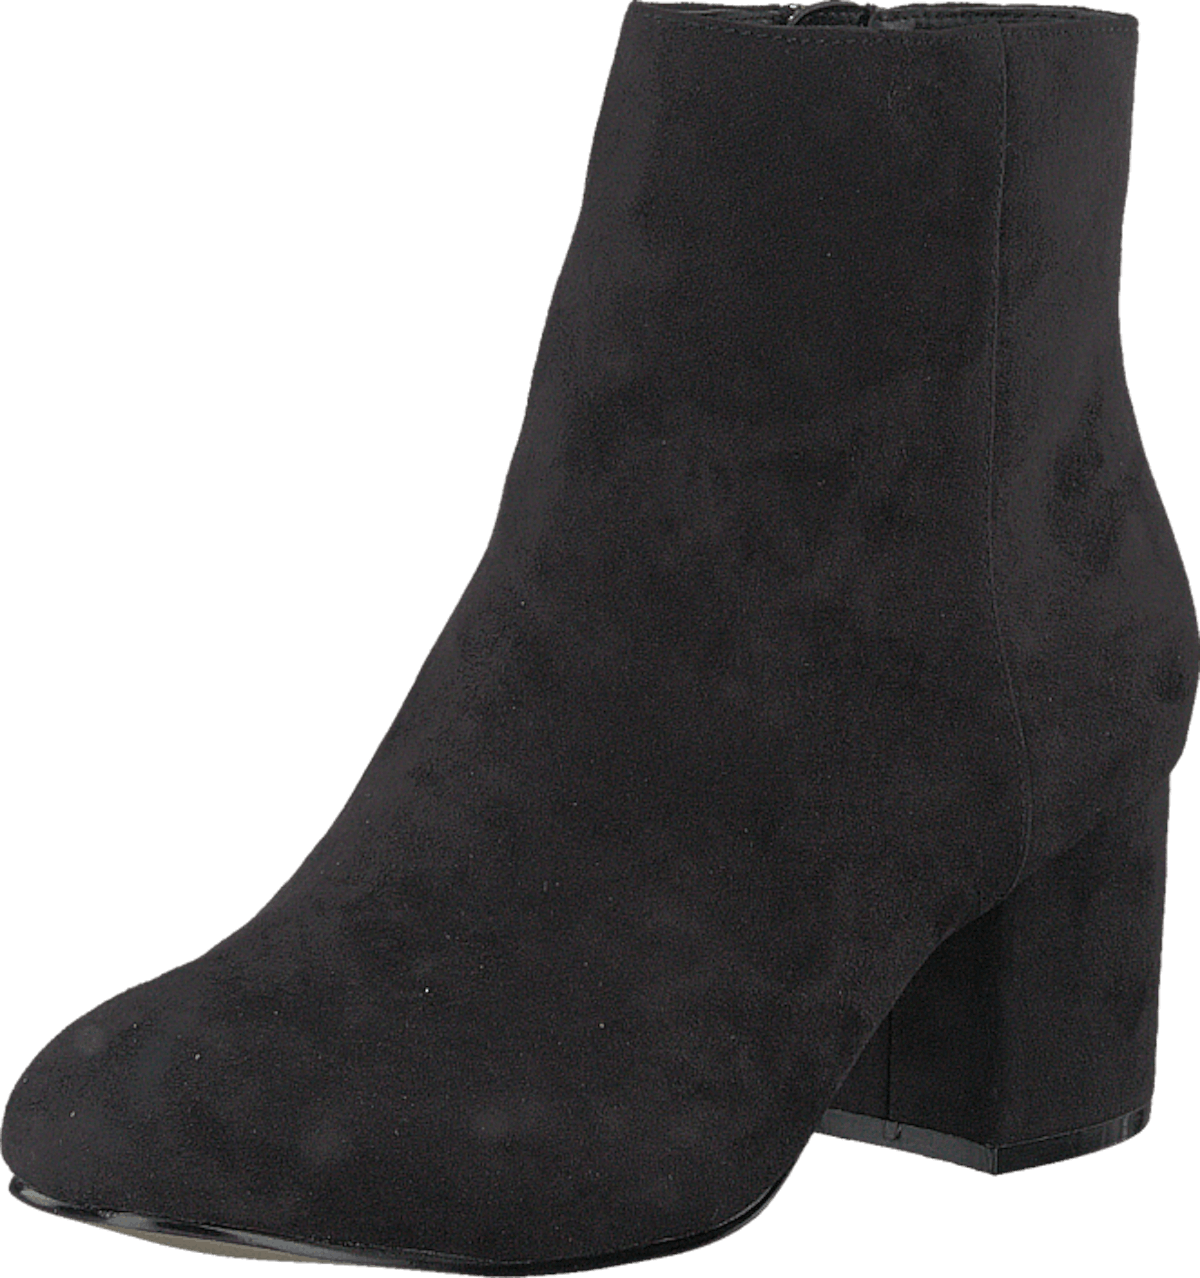 Simple Ankle Boot Black